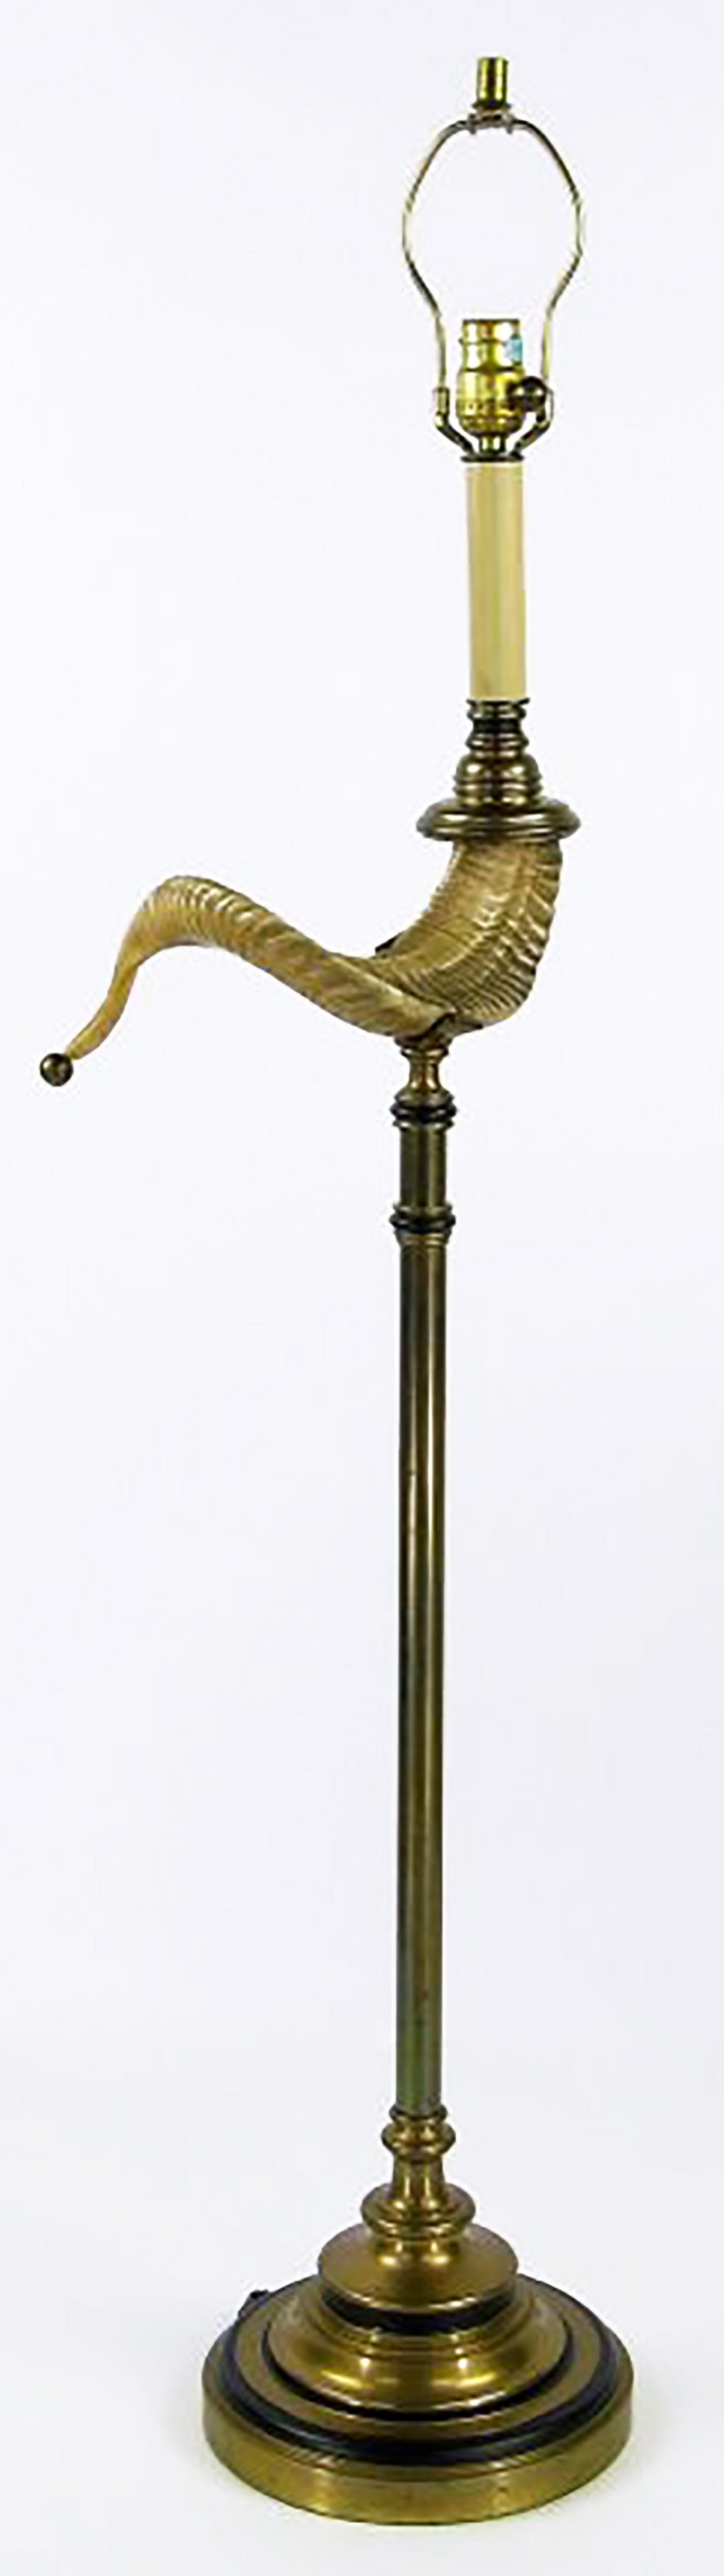 Antique brass and black lacquer base and column cradle a cast ram's Horn on this exceptional floor lamp. Complete with harlequin shade.